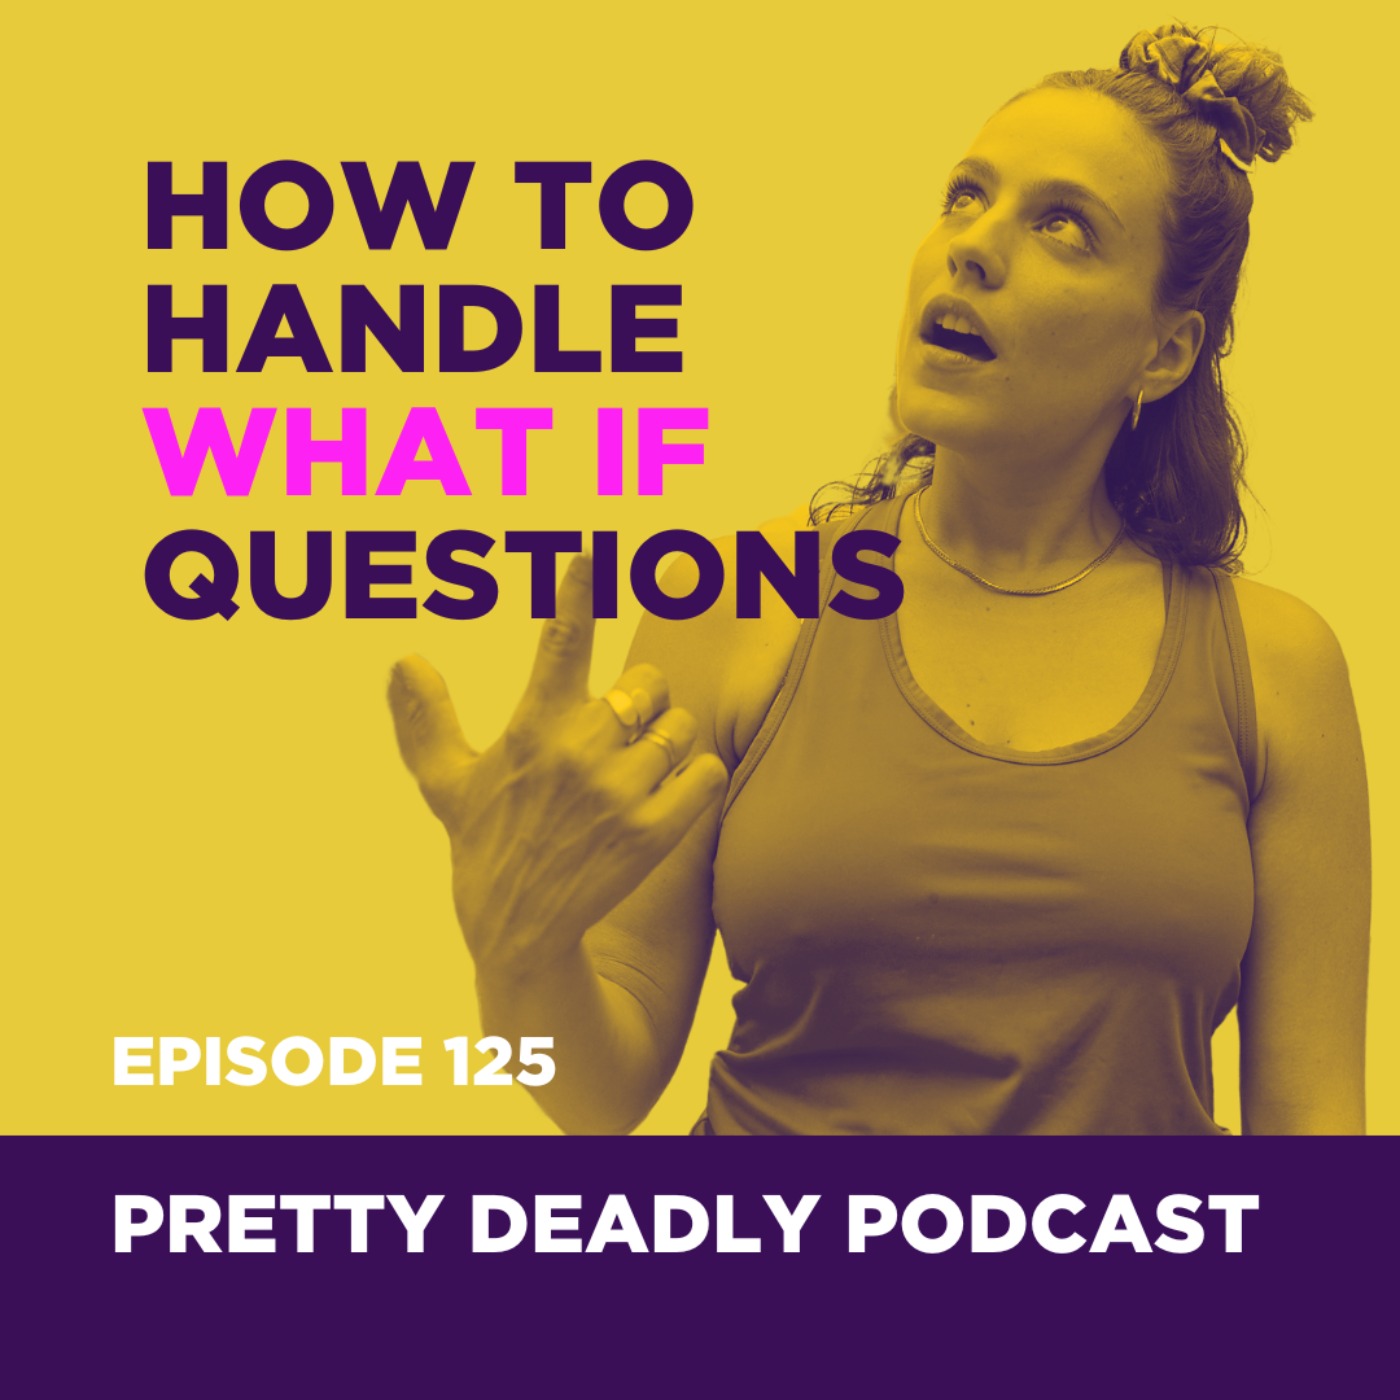 S8 Episode 125: How to Handle What If Questions | Pretty Deadly Podcast